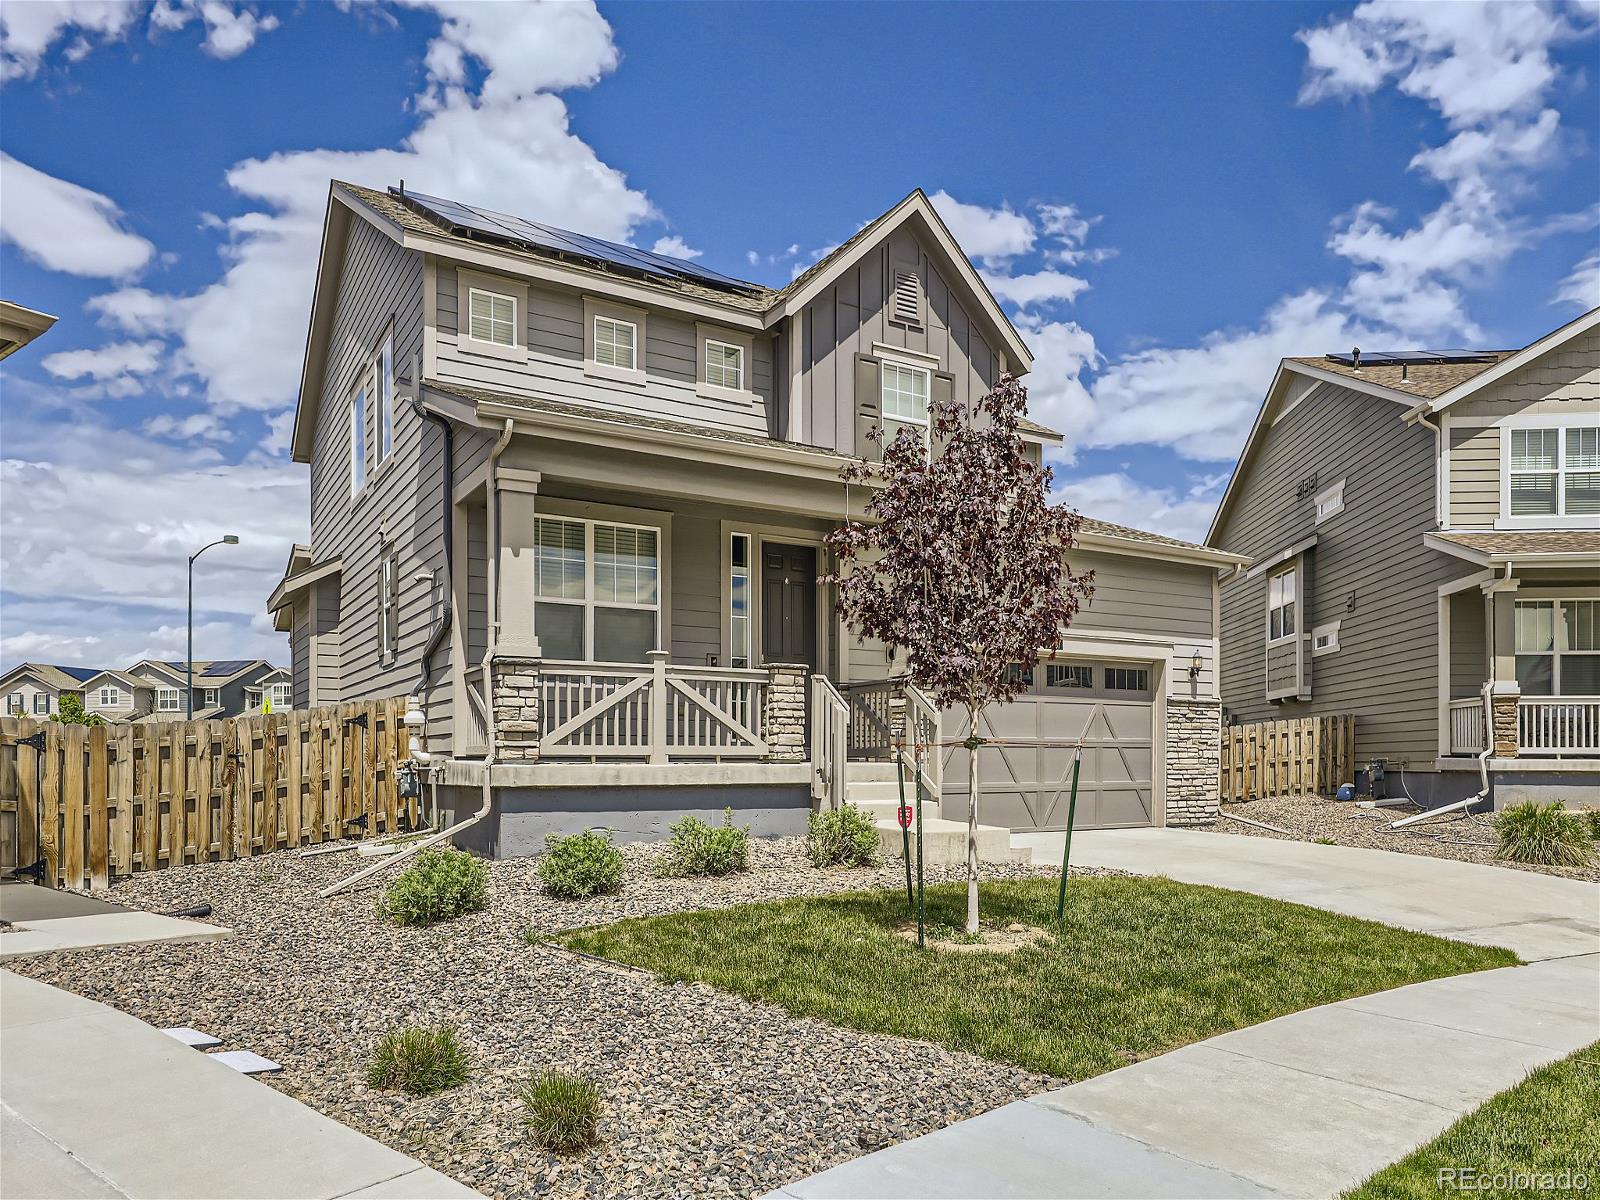 Report Image for 13287 E 109th Place,Commerce City, Colorado